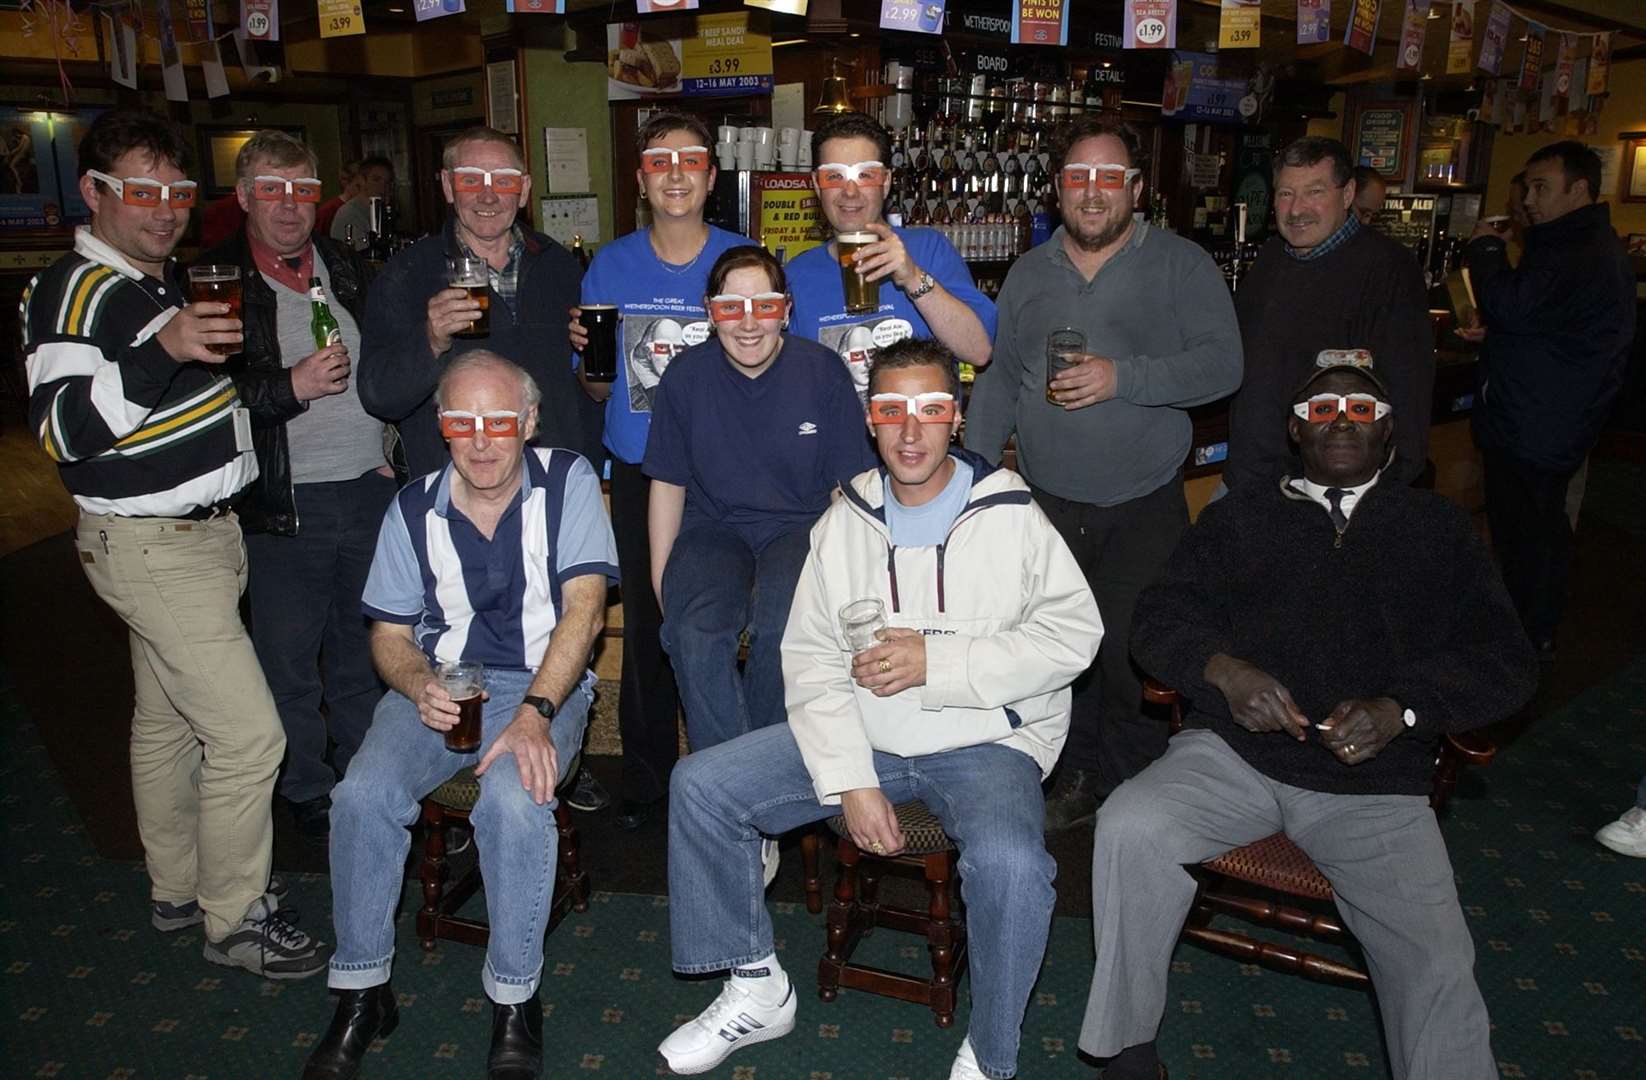 Staff at the Wetherspoons pub in Dartford wearing Beer goggles in May 2003. The Flying Boat is still going today